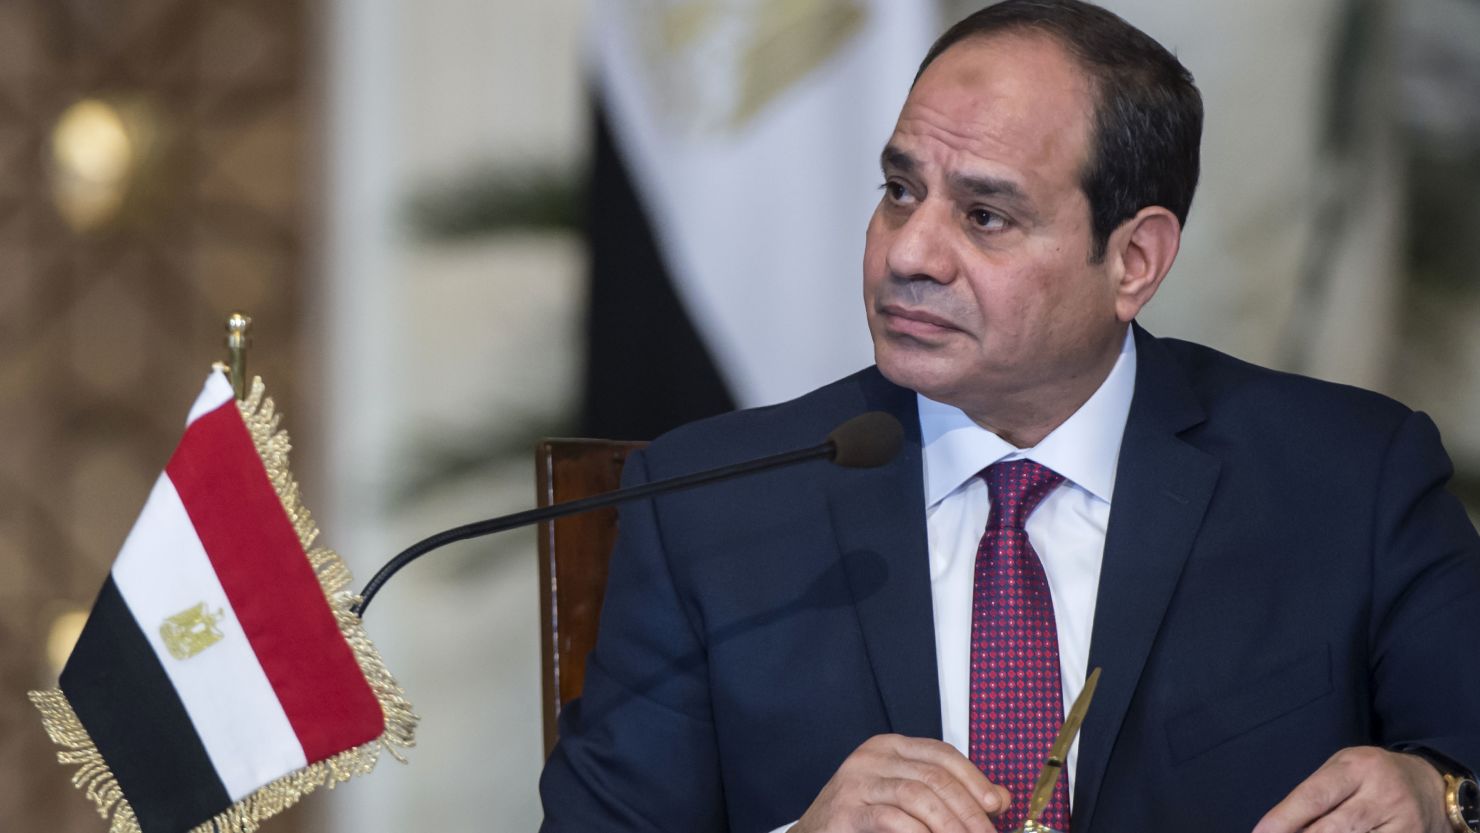 Egyptian President Abdel Fattah al-Sisi attends a press conference at the presidential palace in the capital Cairo on December 11, 2017. 